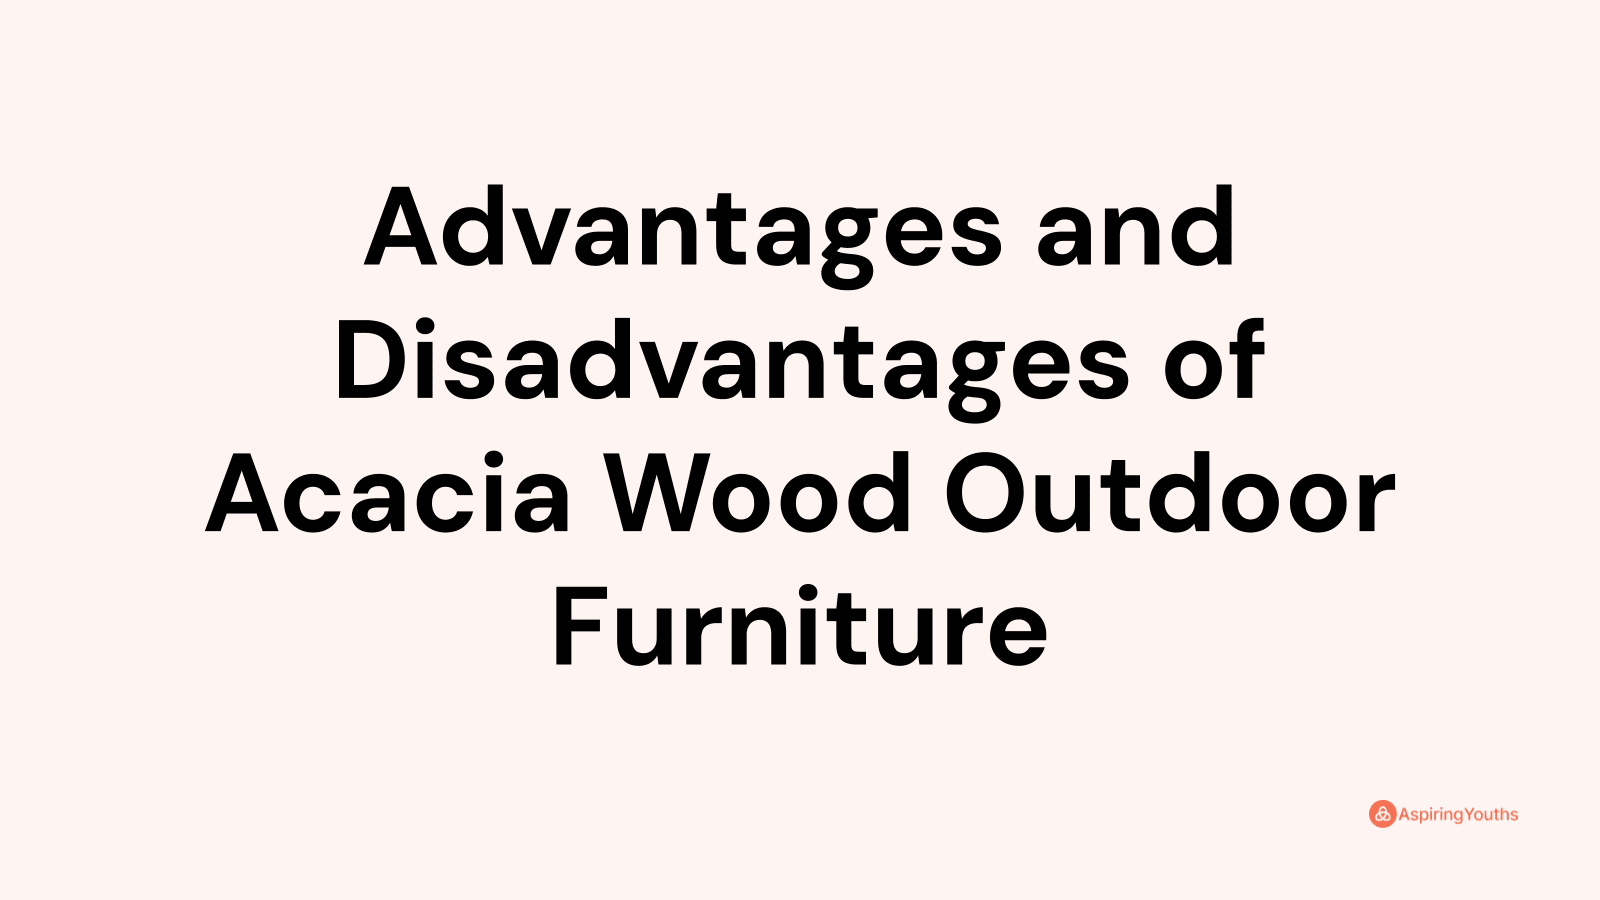 Advantages and disadvantages of Acacia Wood Outdoor Furniture